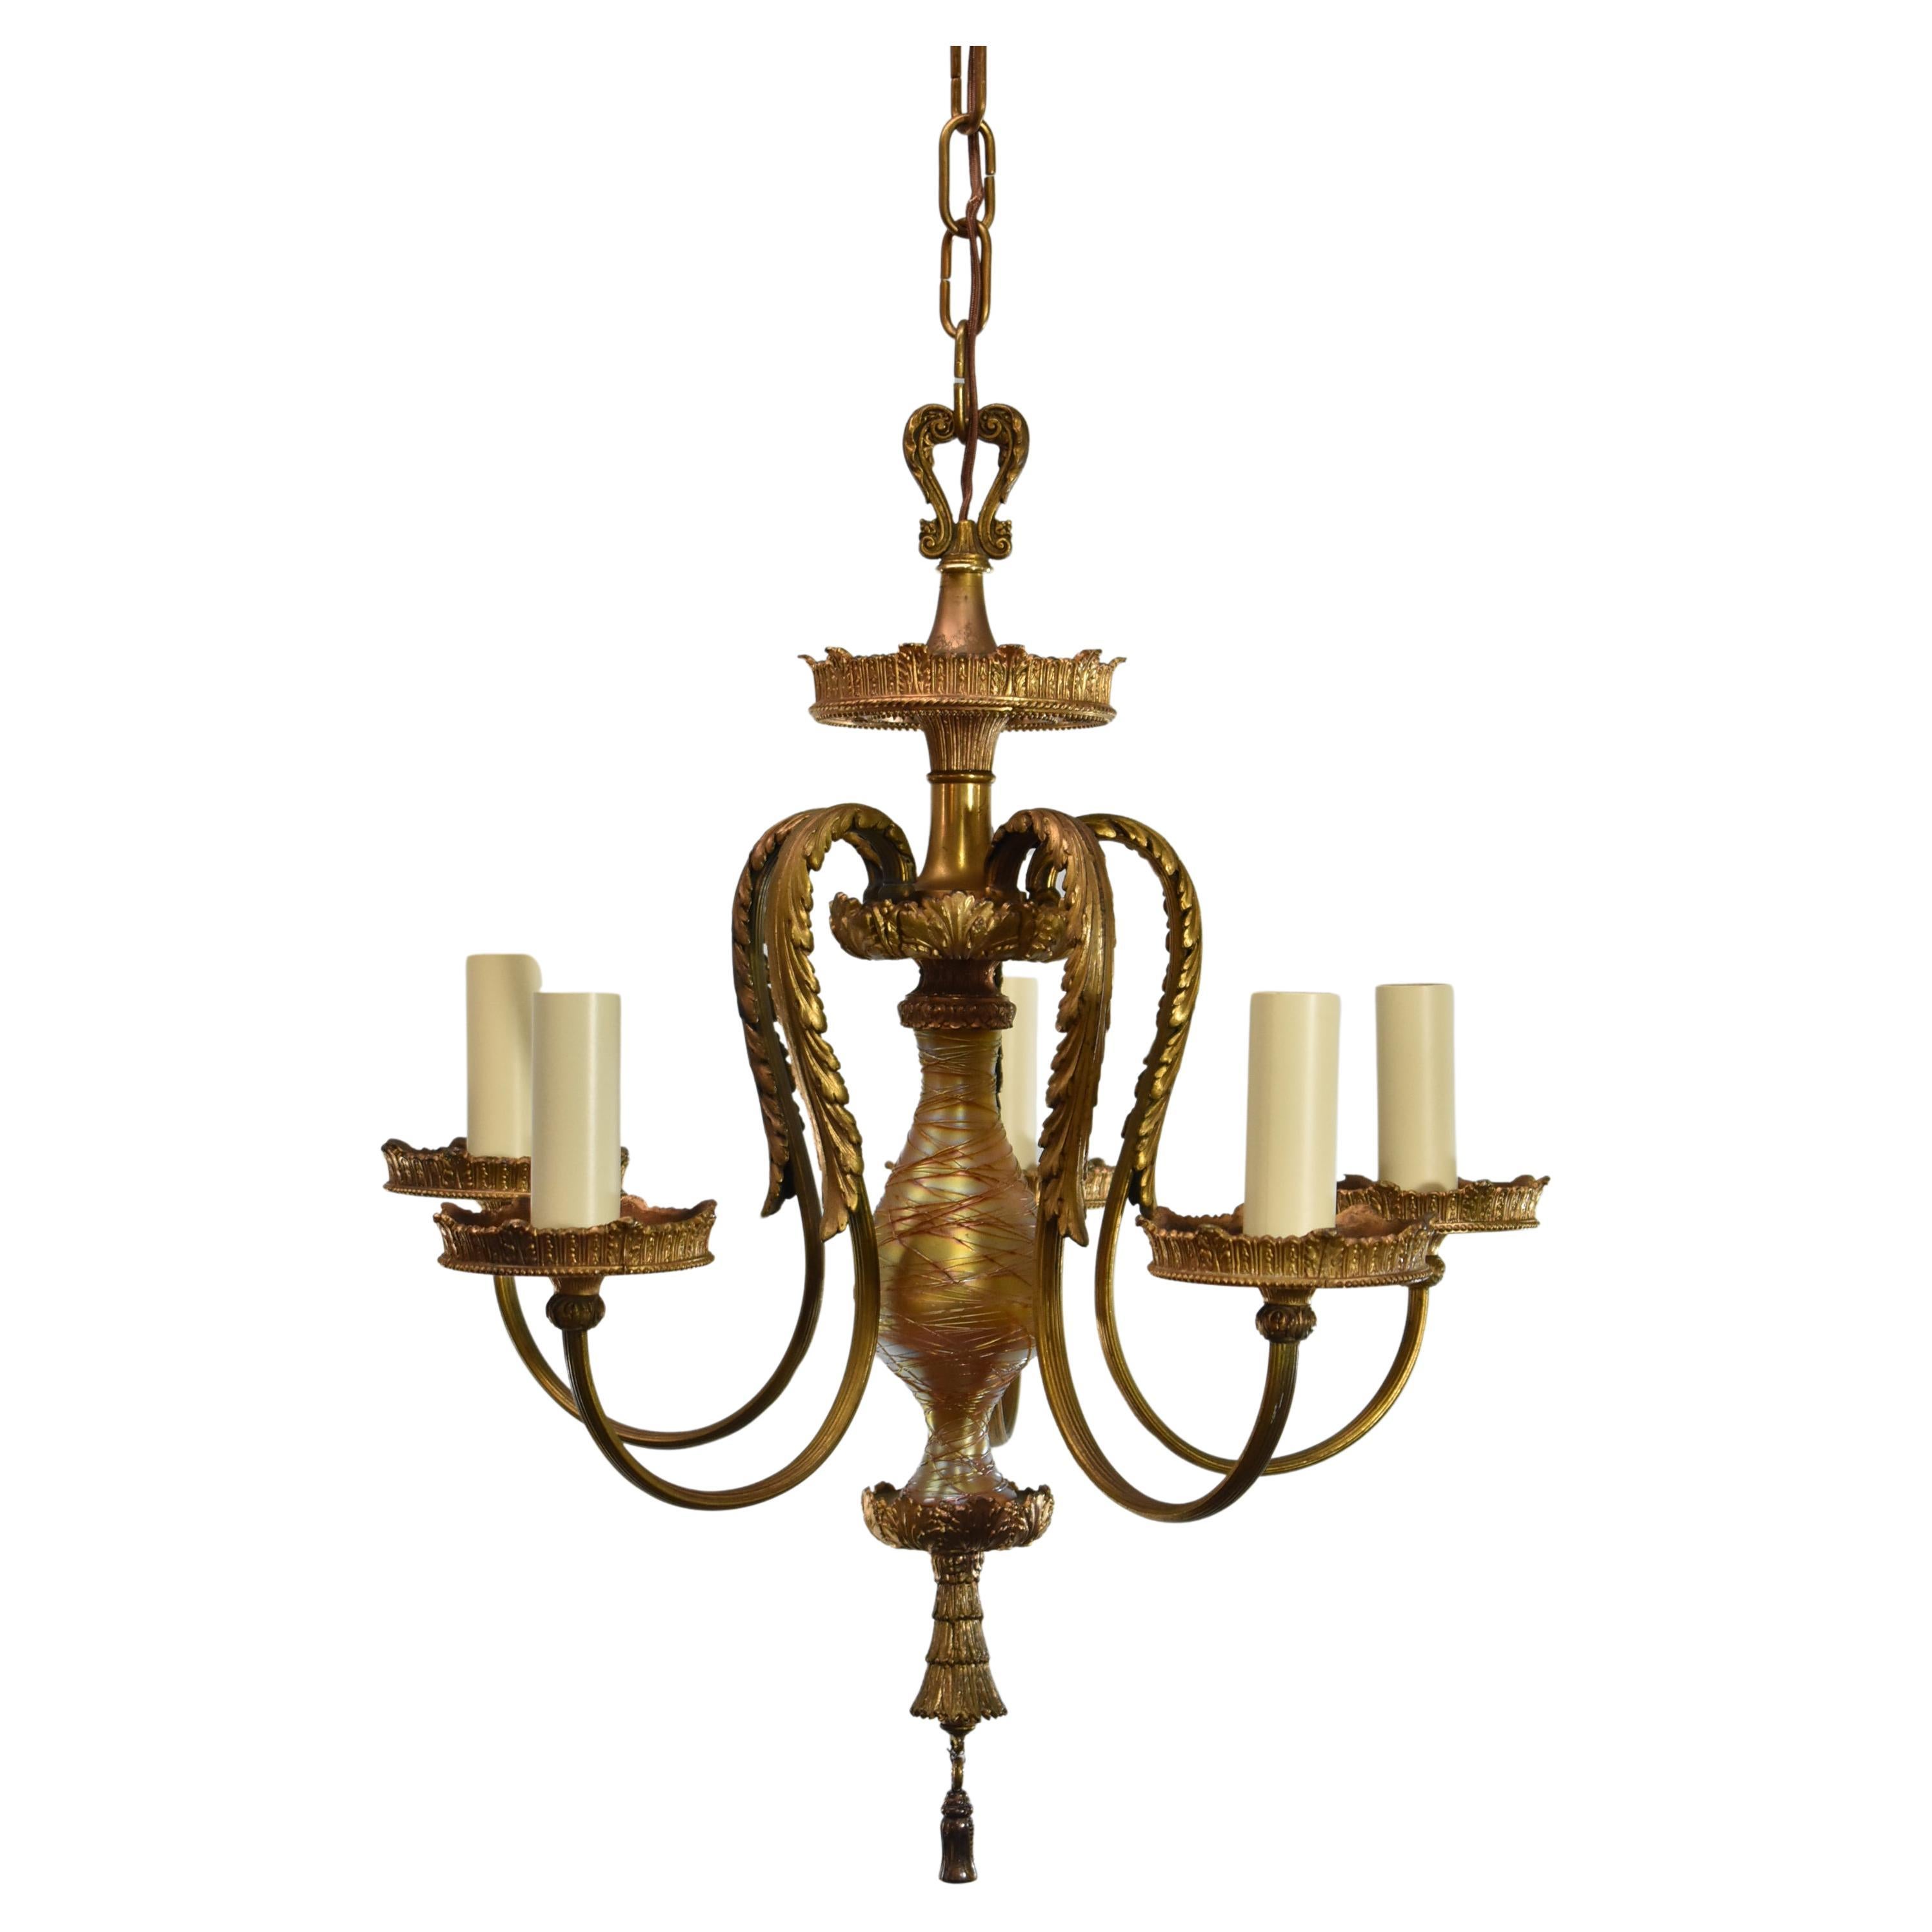 Durand Art Glass Five-Arm Chandelier with Gold Dore